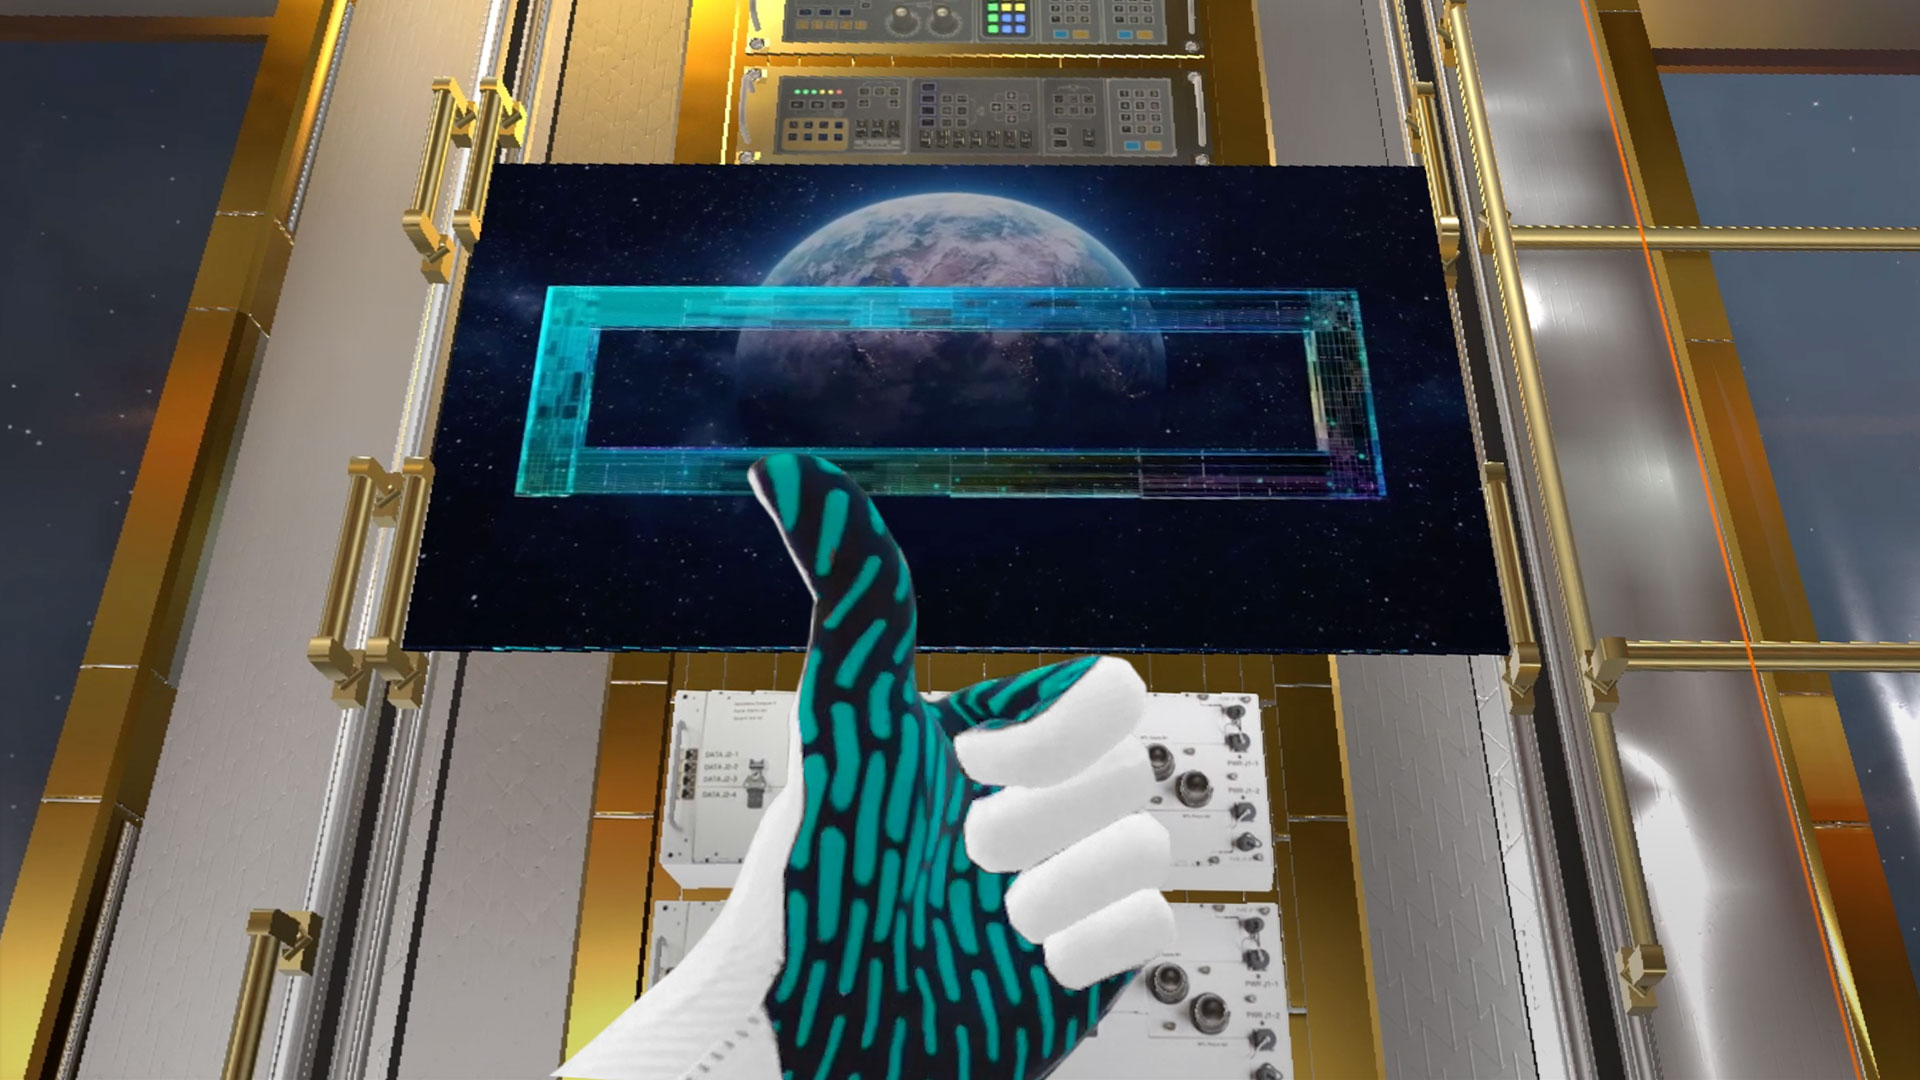 A view of what a hand looks like in the virtual world. The hand gives a thumbs up gesture to a large screen that shows Earth from above.